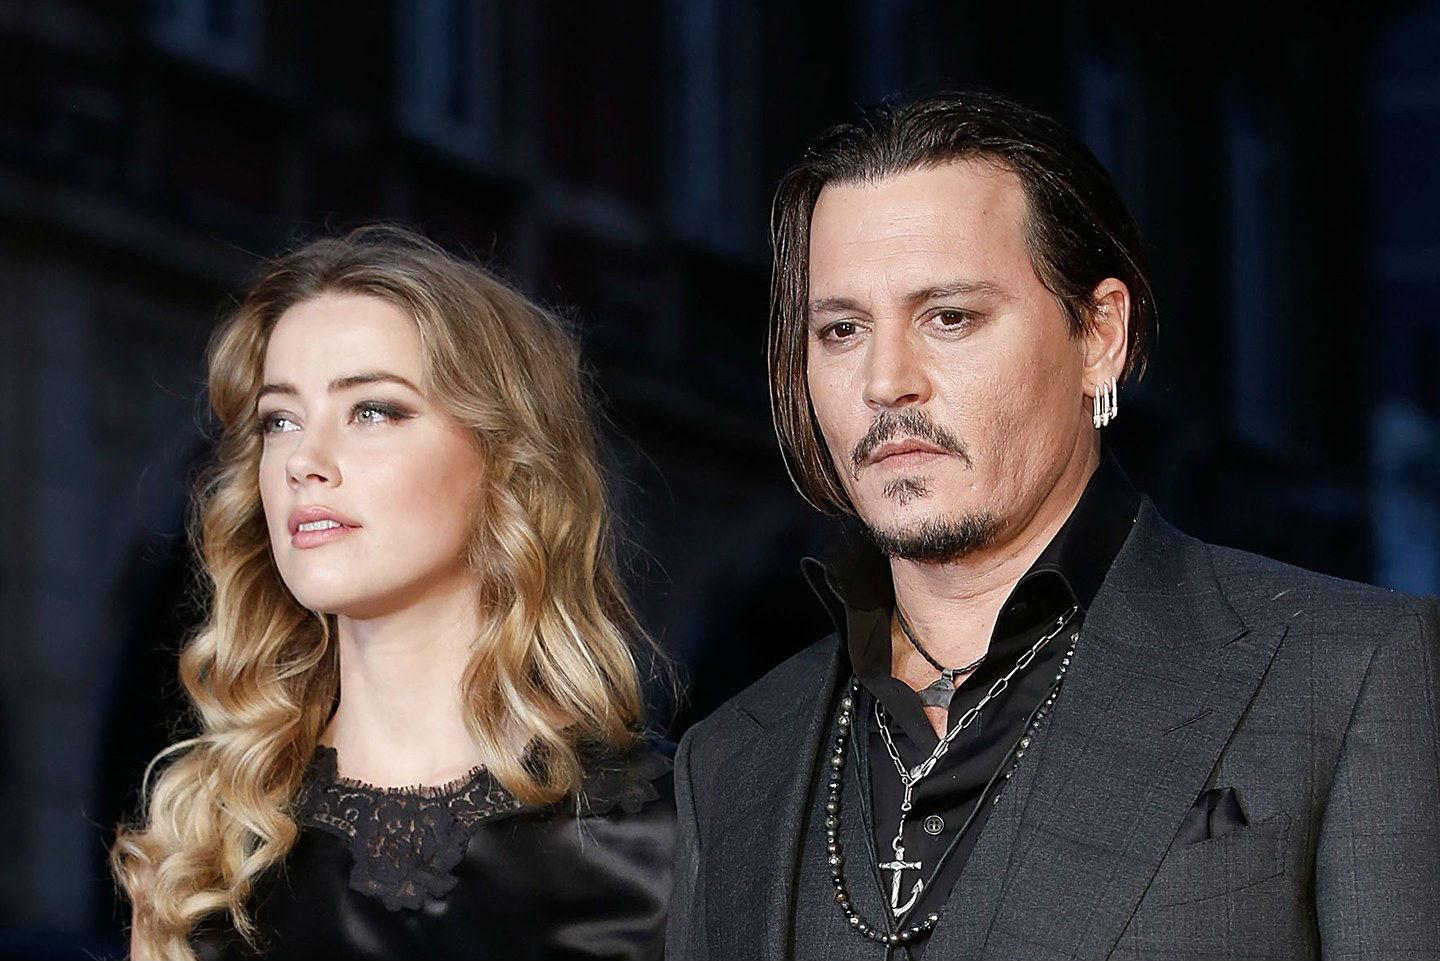 Heard filed for divorce from Depp in May